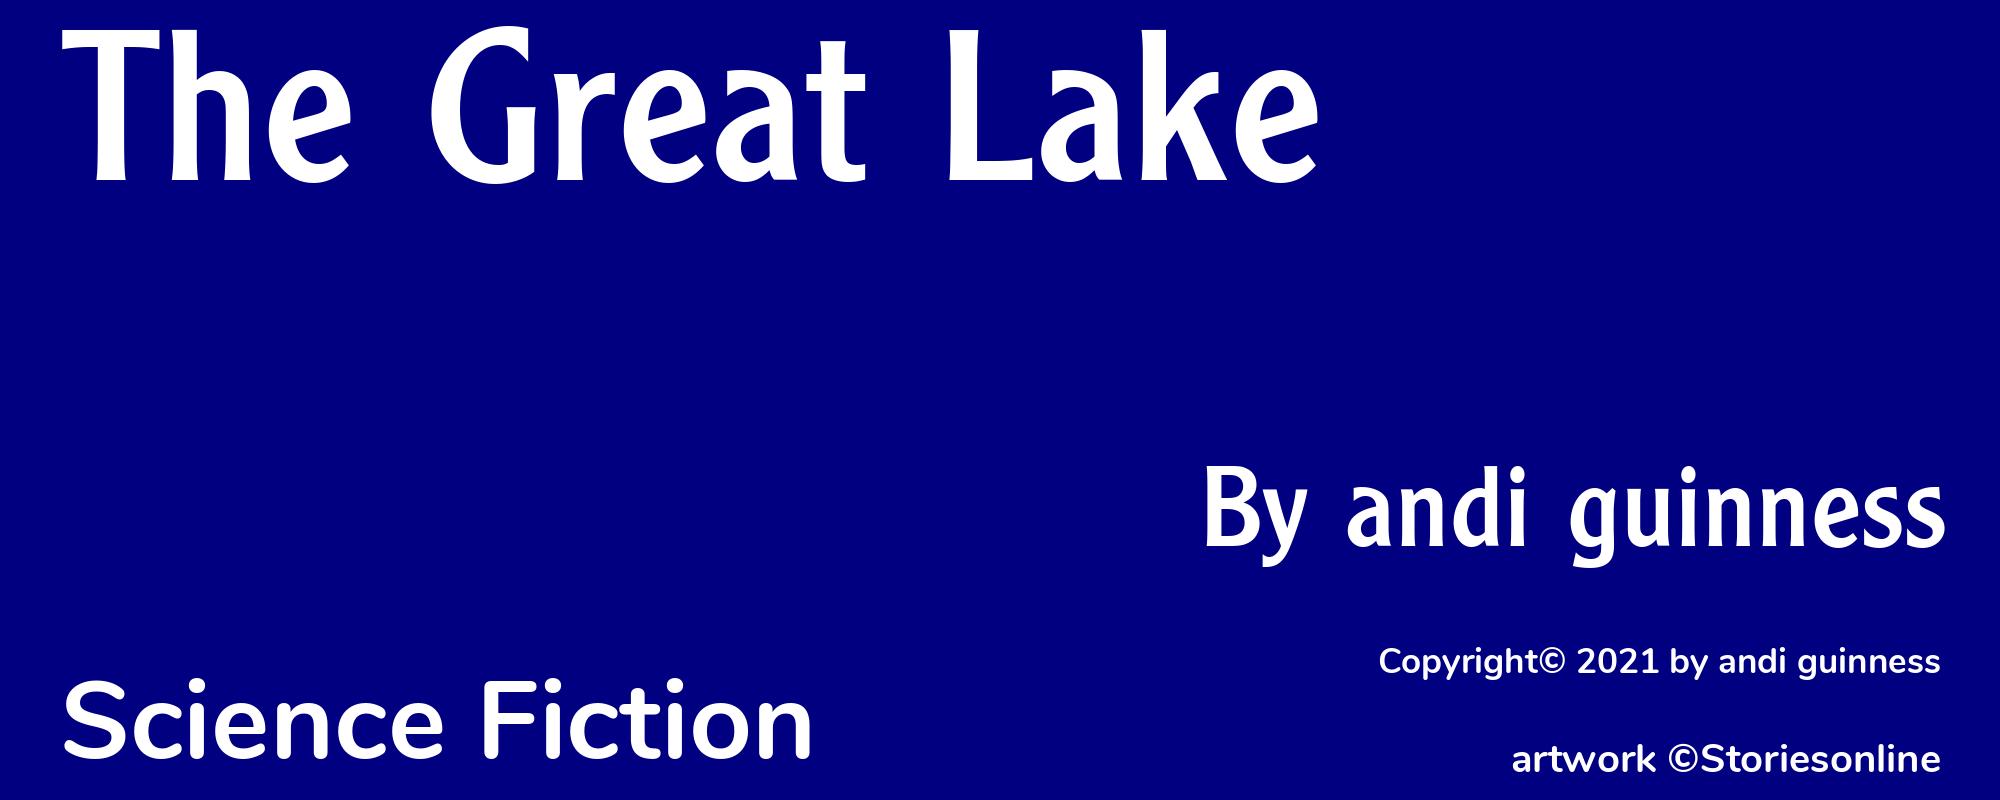 The Great Lake - Cover